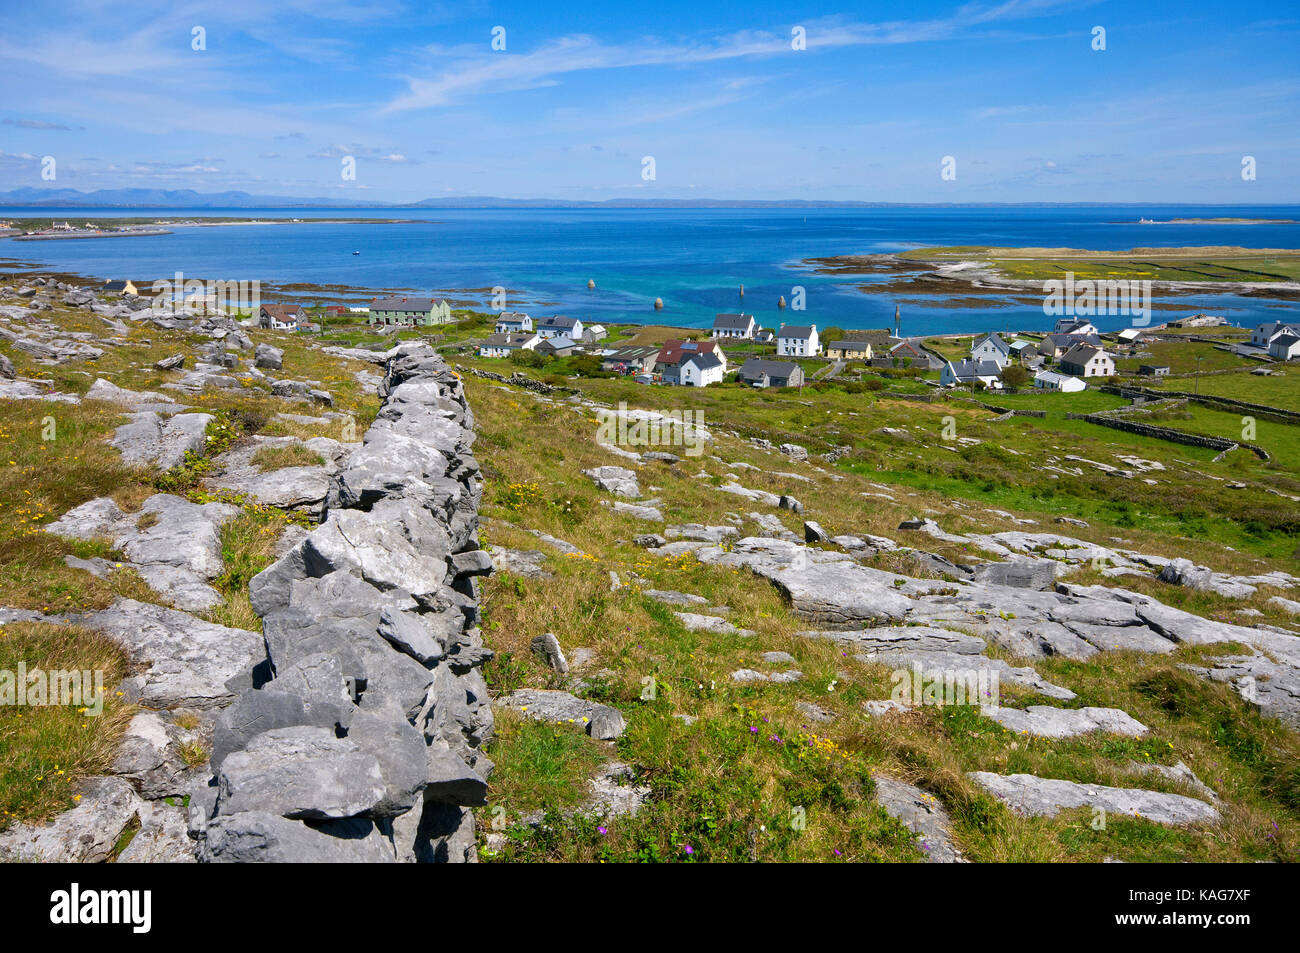 View of the Killeany Bay at Inishmore Island, Aran Islands, County Galway, Ireland Stock Photo